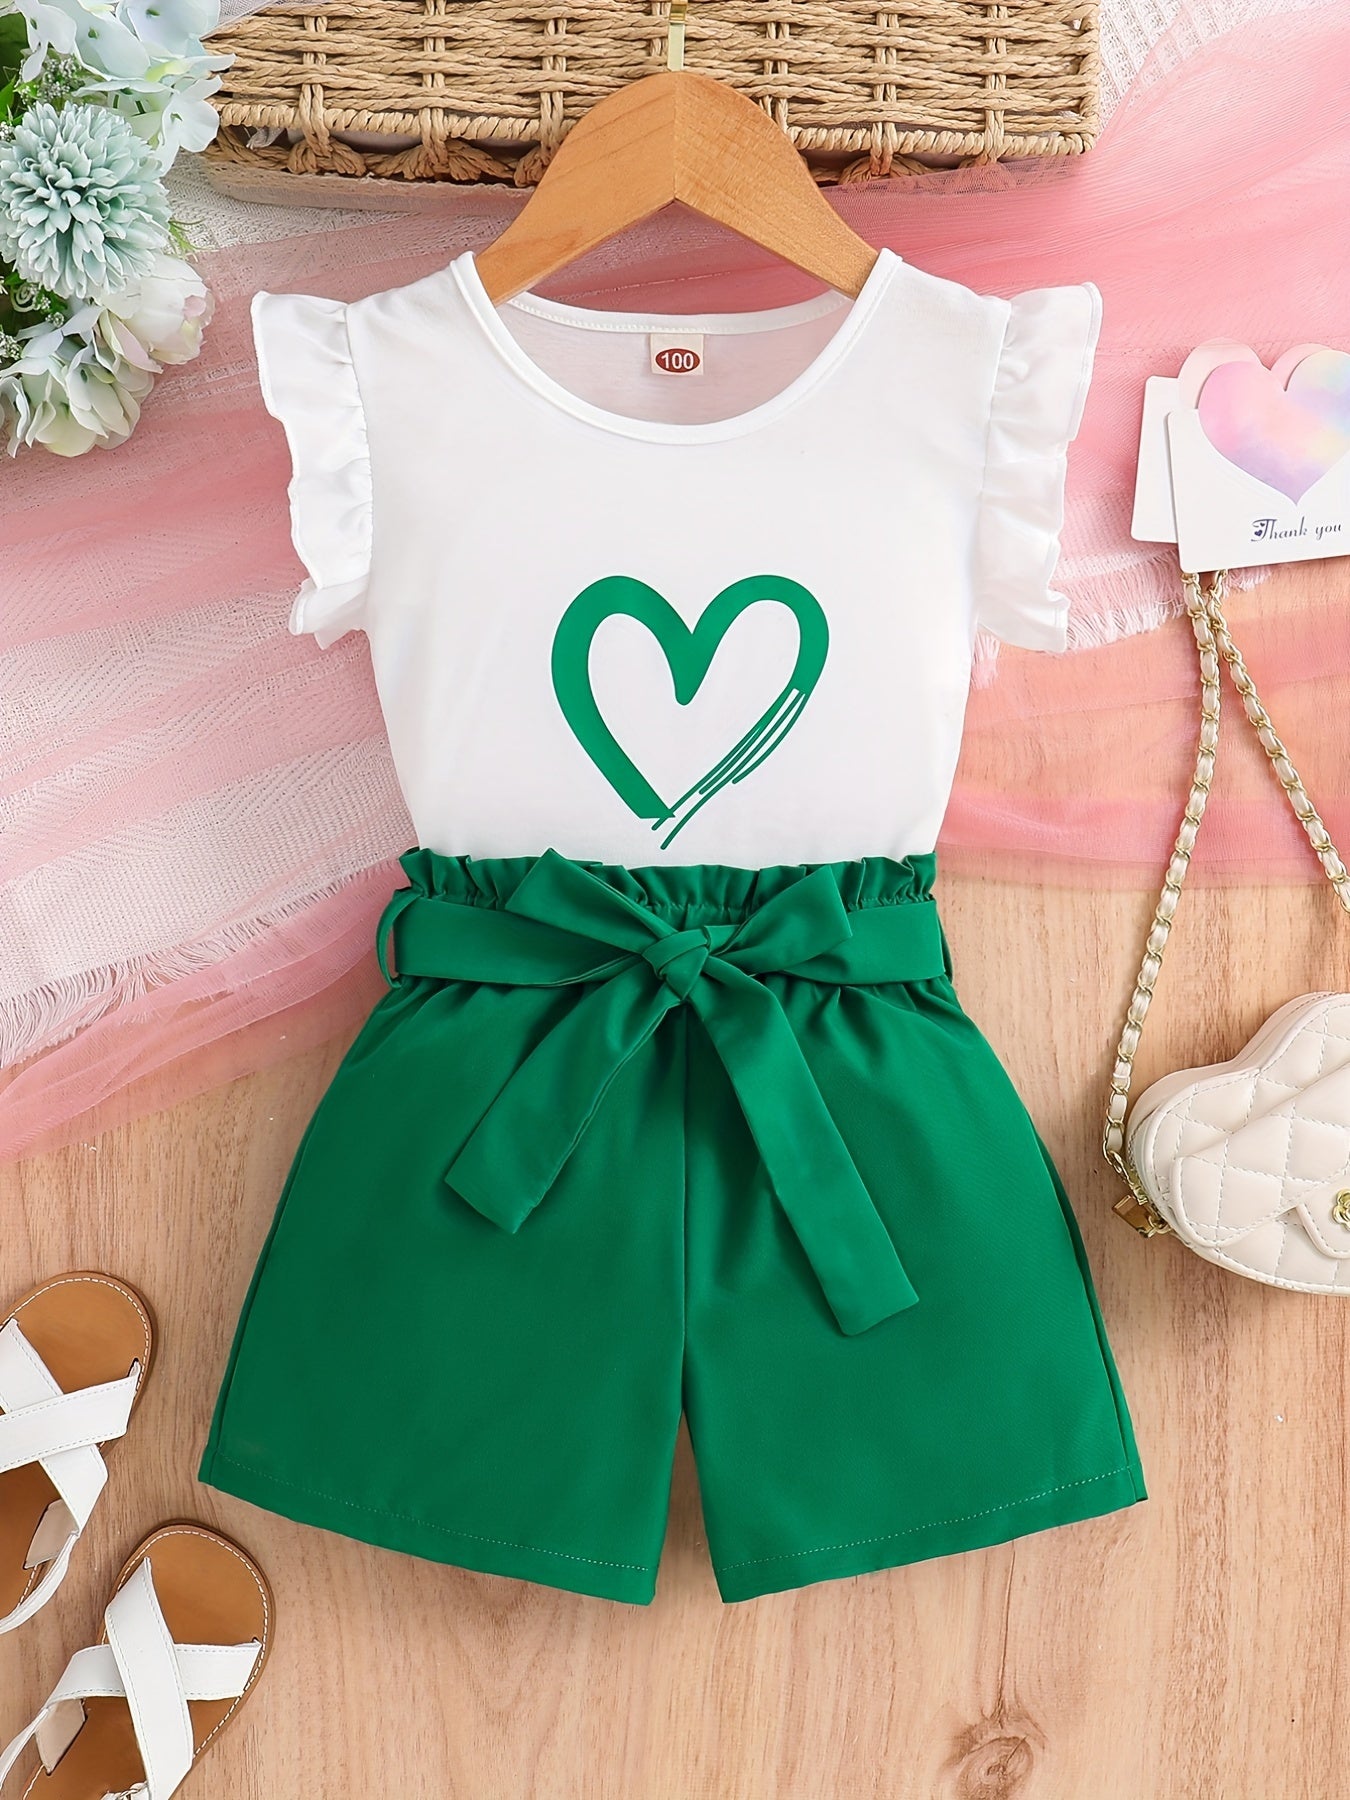 2pcs Girls Daily Casual Heart Print Crew Neck Sleeveless Top & Bow Shorts With Belt For Summer Kids Clothes